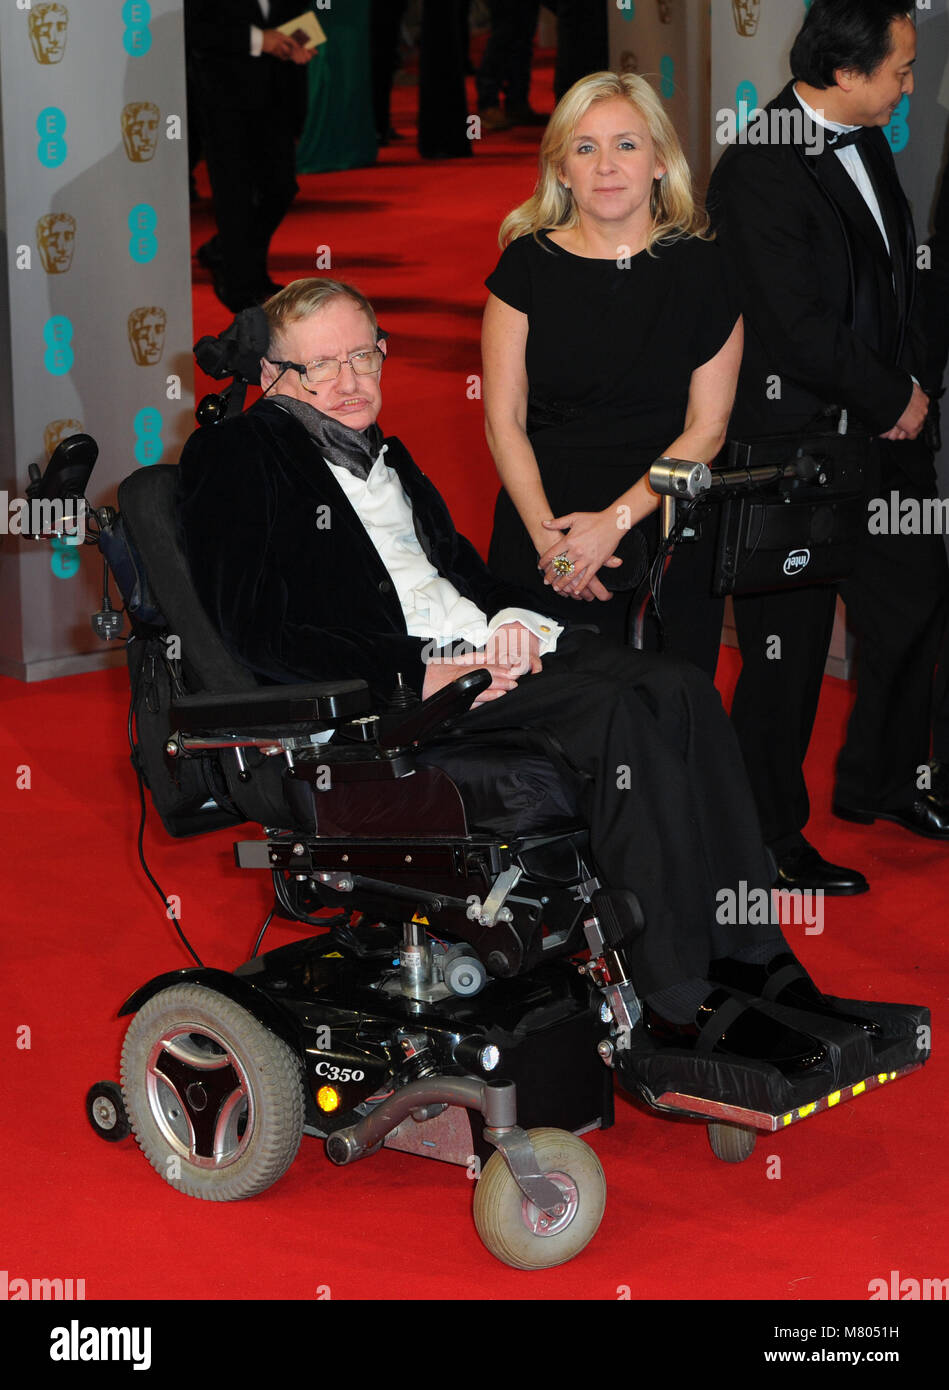 Stephen Hawking and Jane Wilde arrive at the 67th annual EE British Academy Film Awards, Baftas, at Royal Opera House in London, Great Britain, on 08 February 2015. Photo: Hubert Boesl /dpa - NO WIRE SERVICE - | usage worldwide Stock Photo